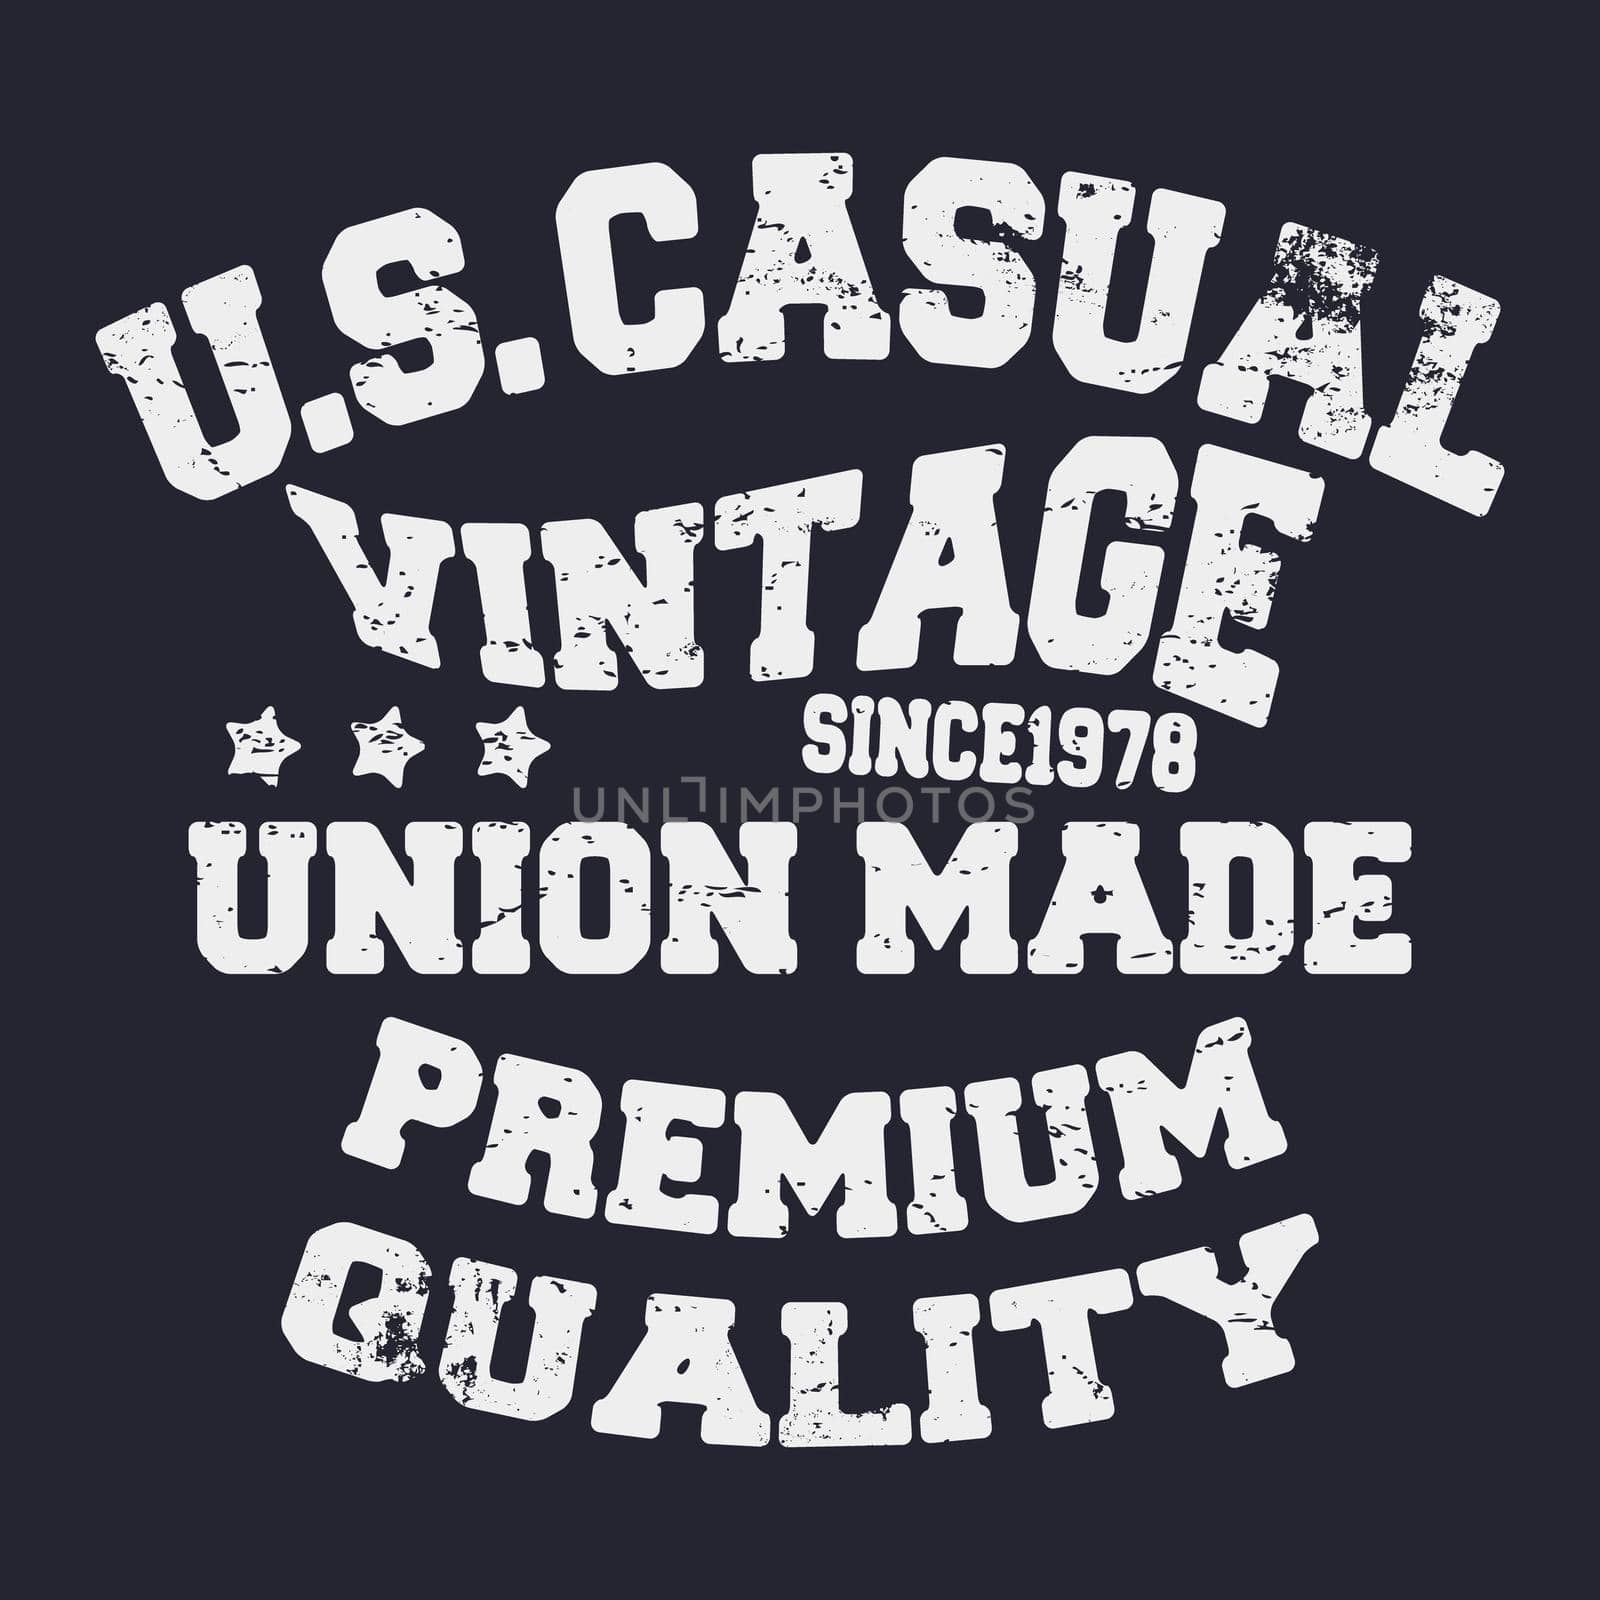 T-shirt print design. US casual vintage stamp. Printing and badge applique label t-shirts, jeans, casual wear. Vector illustration.